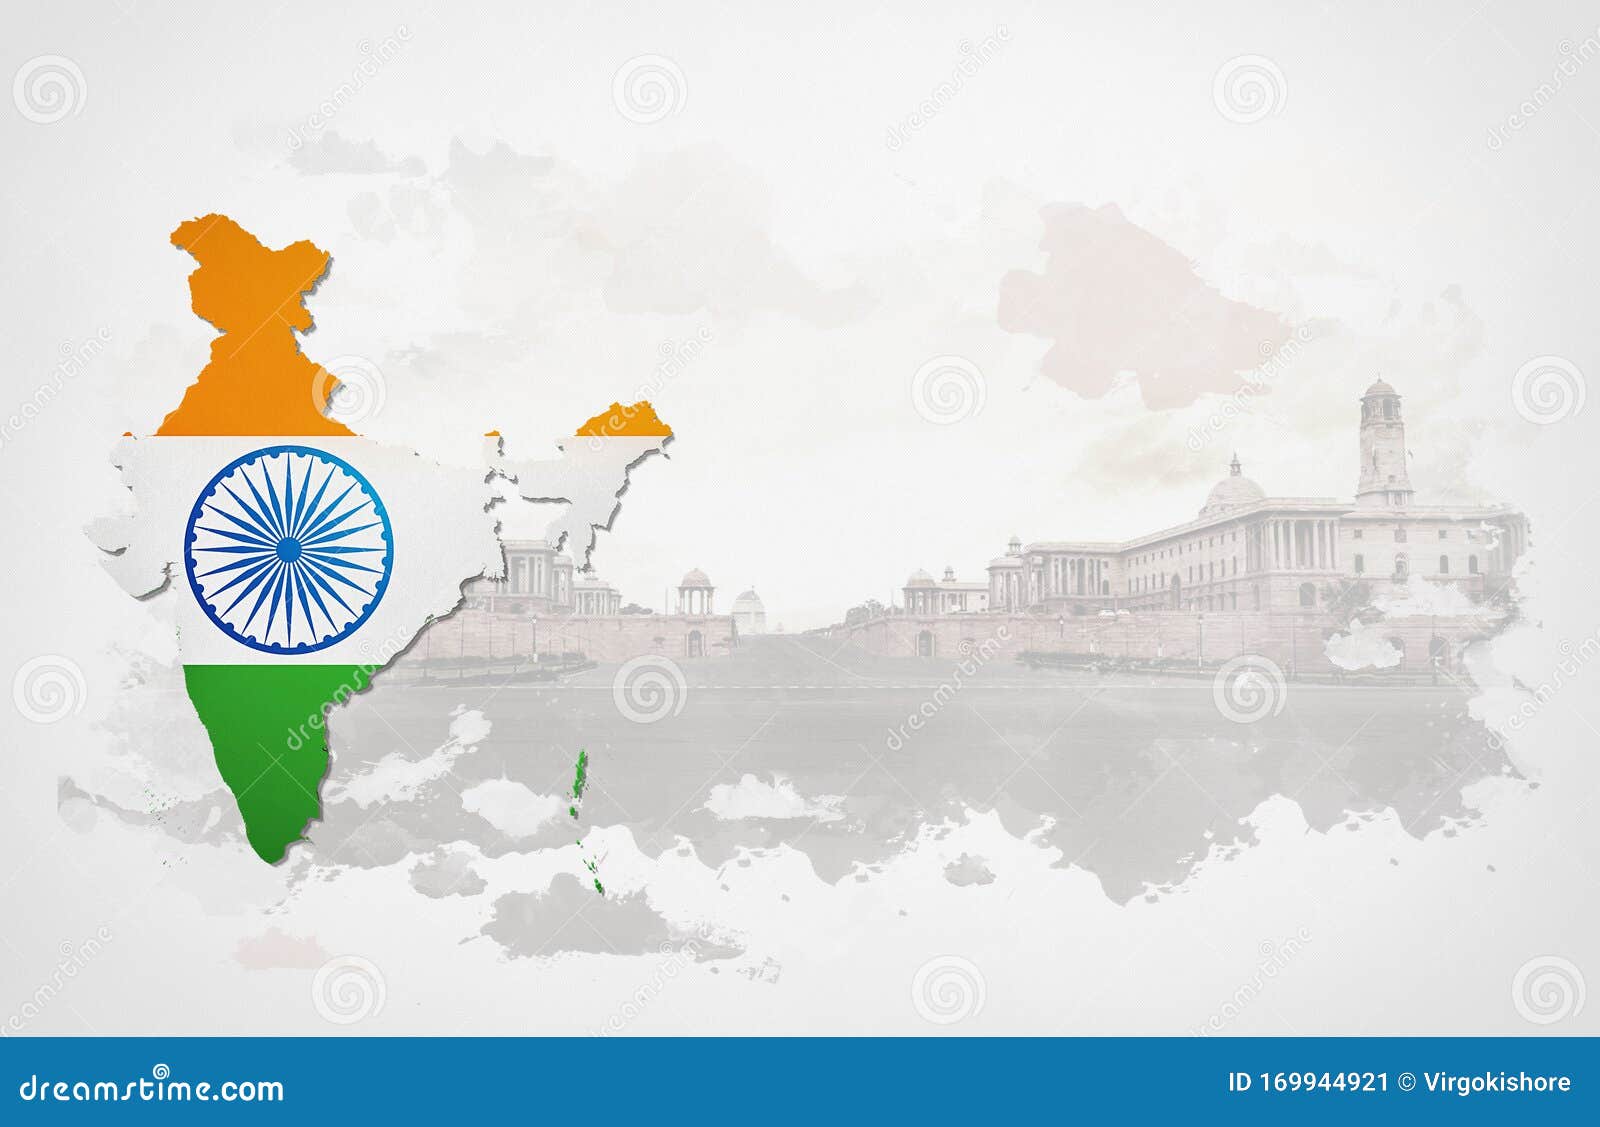 INDIA MAP with NATIONAL EMBLEM BACKGROUND for INDEPENDENCE DAY and REPUBLIC  DAY INDIA BACKGROUND Stock Image - Image of mahal, nation: 169944921